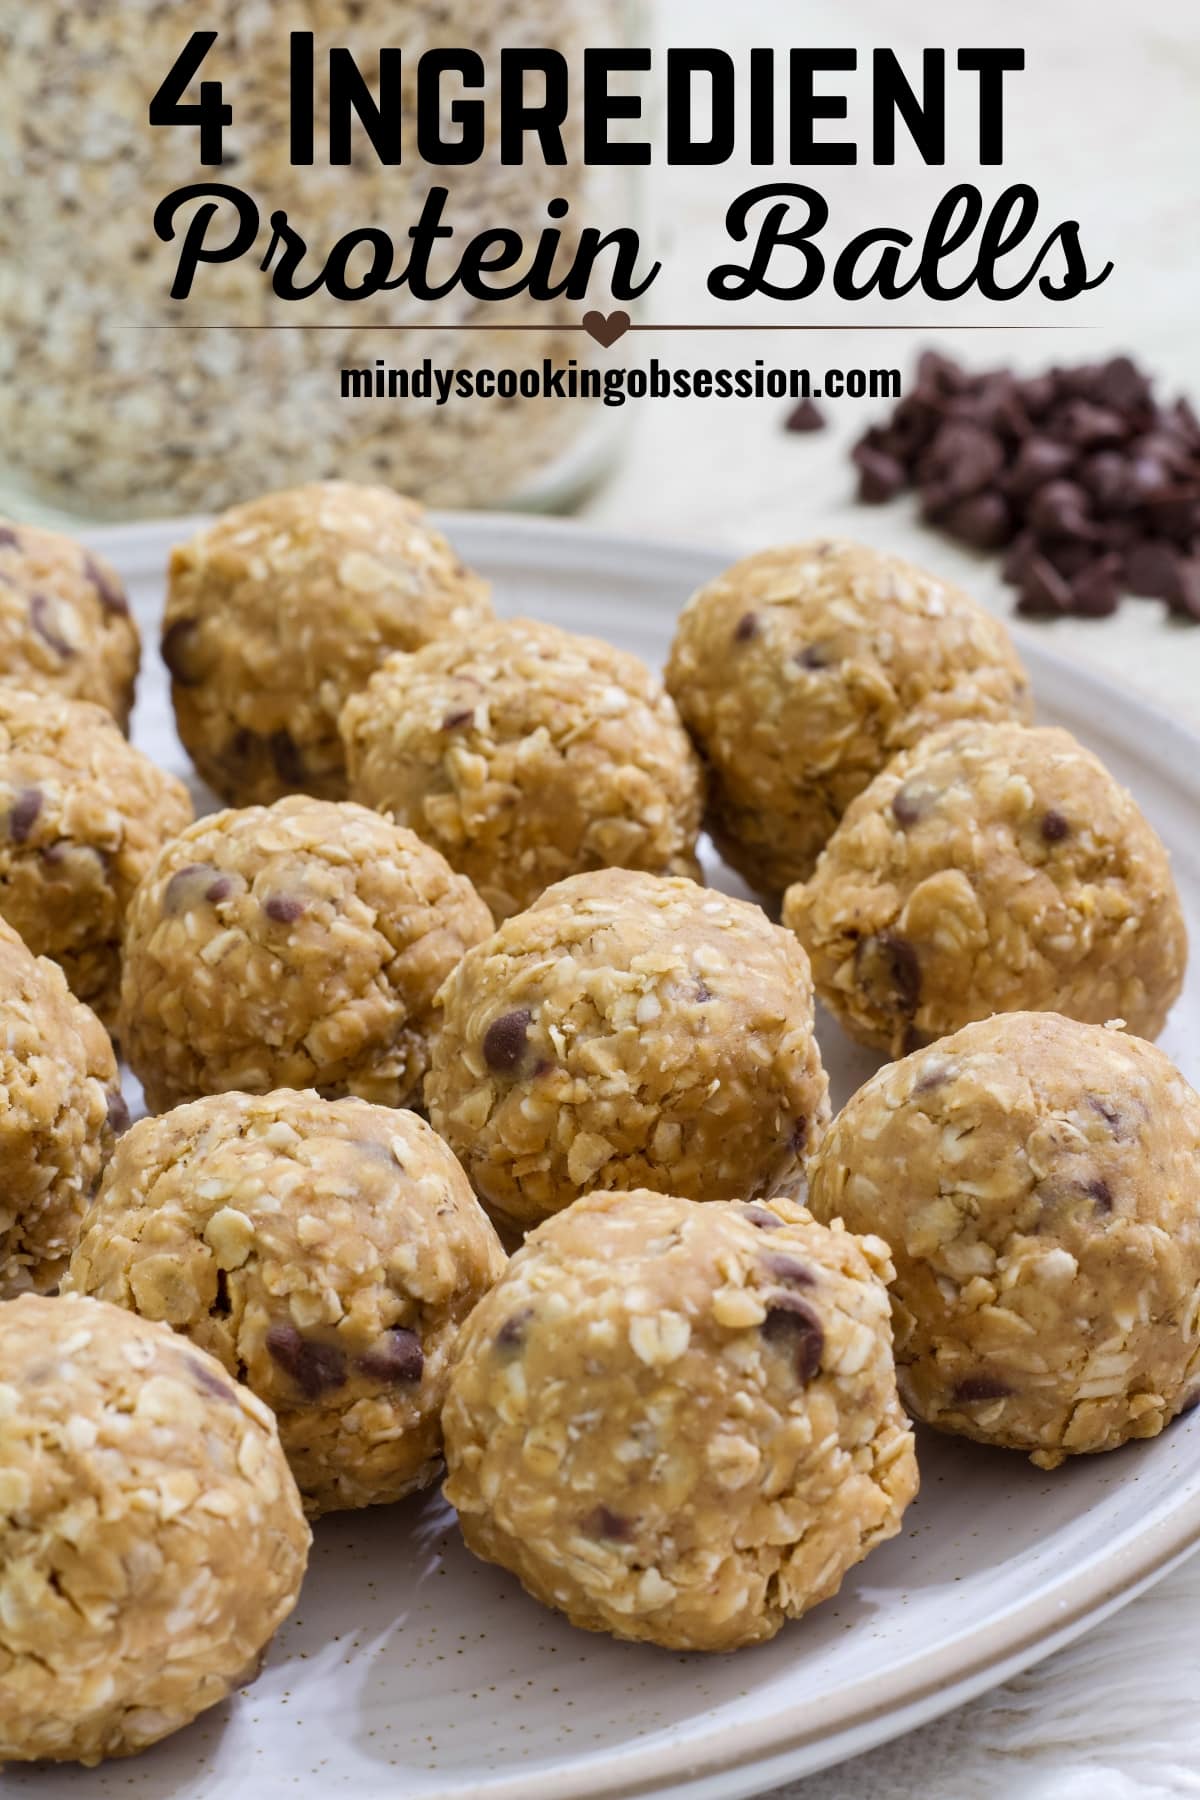 4 Ingredient Protein Rich Peanut Butter Energy Balls are made with oats and nut butter for a healthy snack the whole family is sure to love. via @mindyscookingobsession